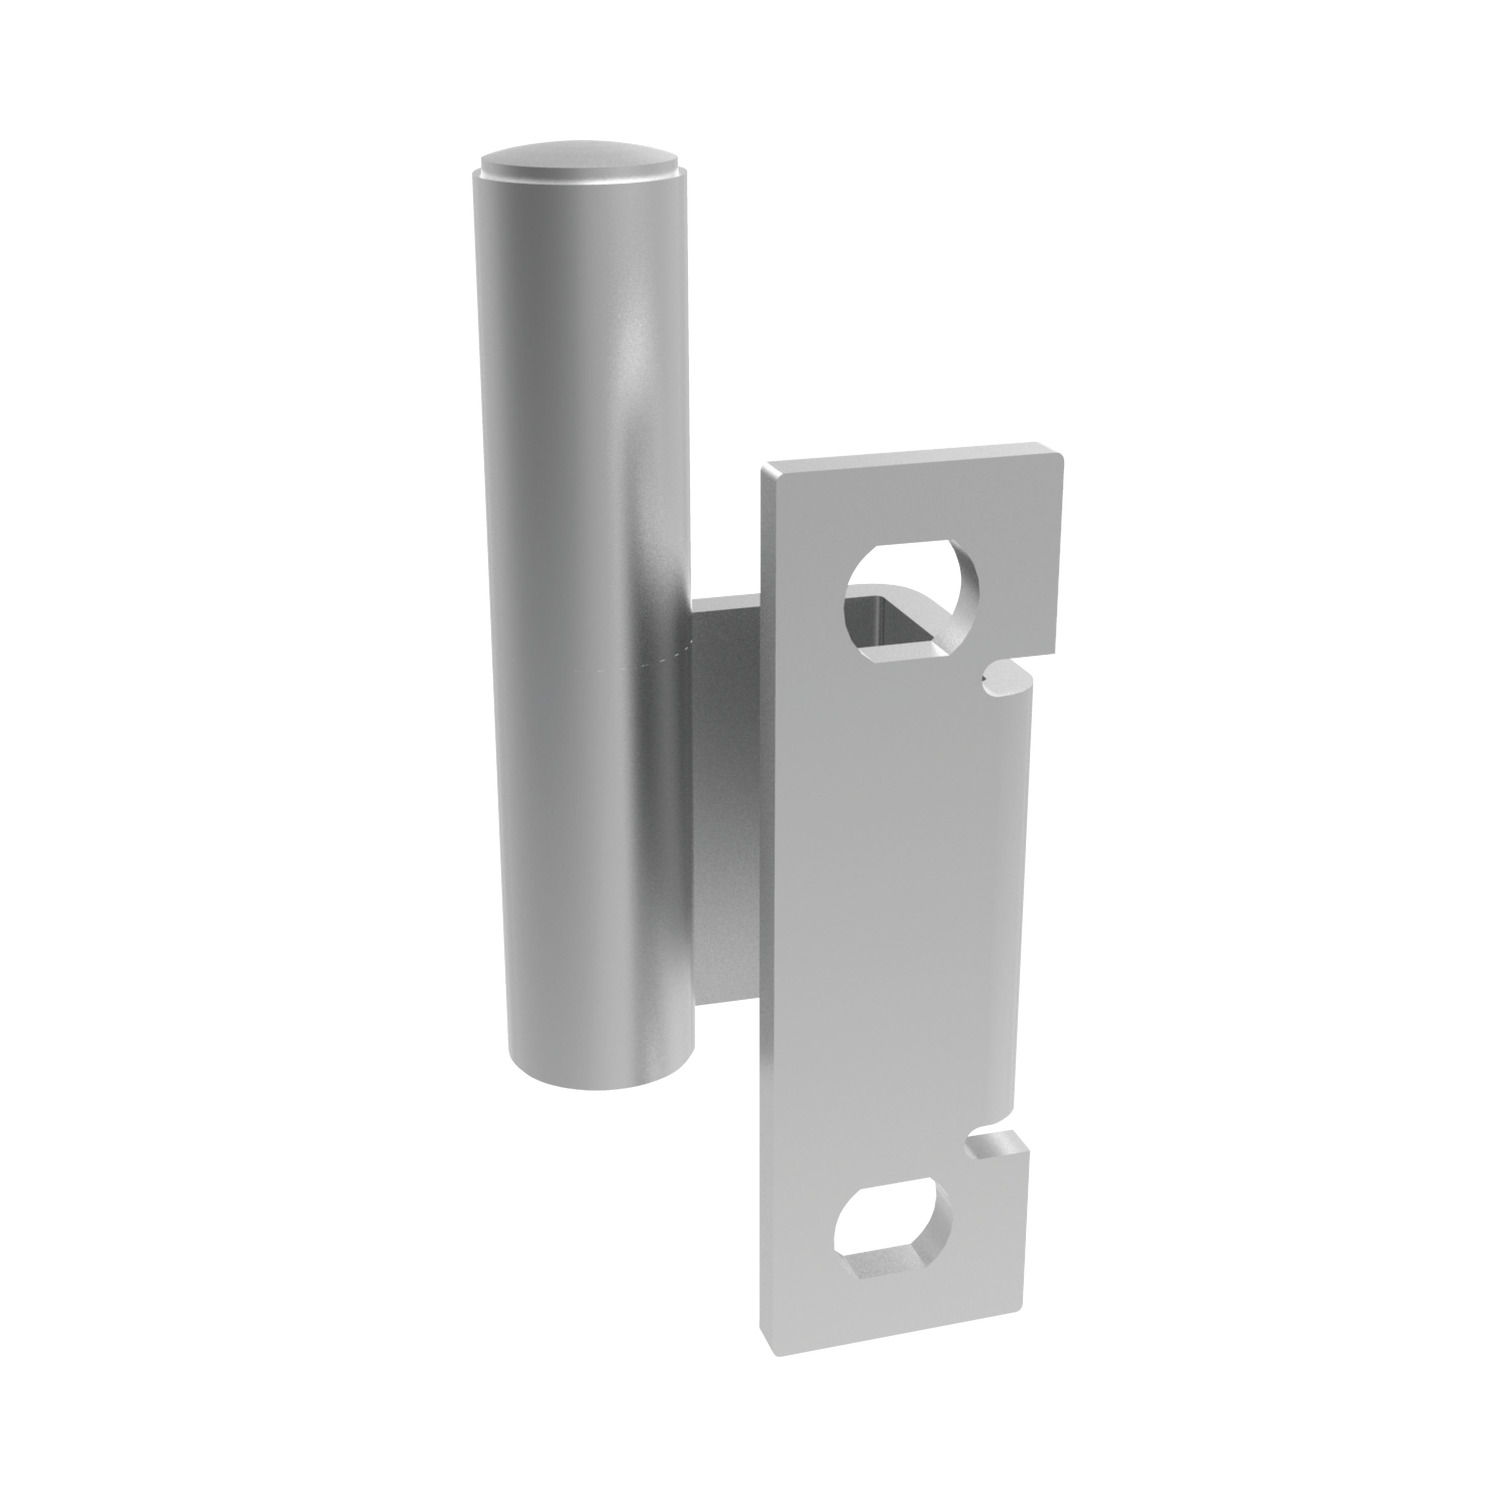 S2170 - Concealed Pivot Hinges - Lift Off